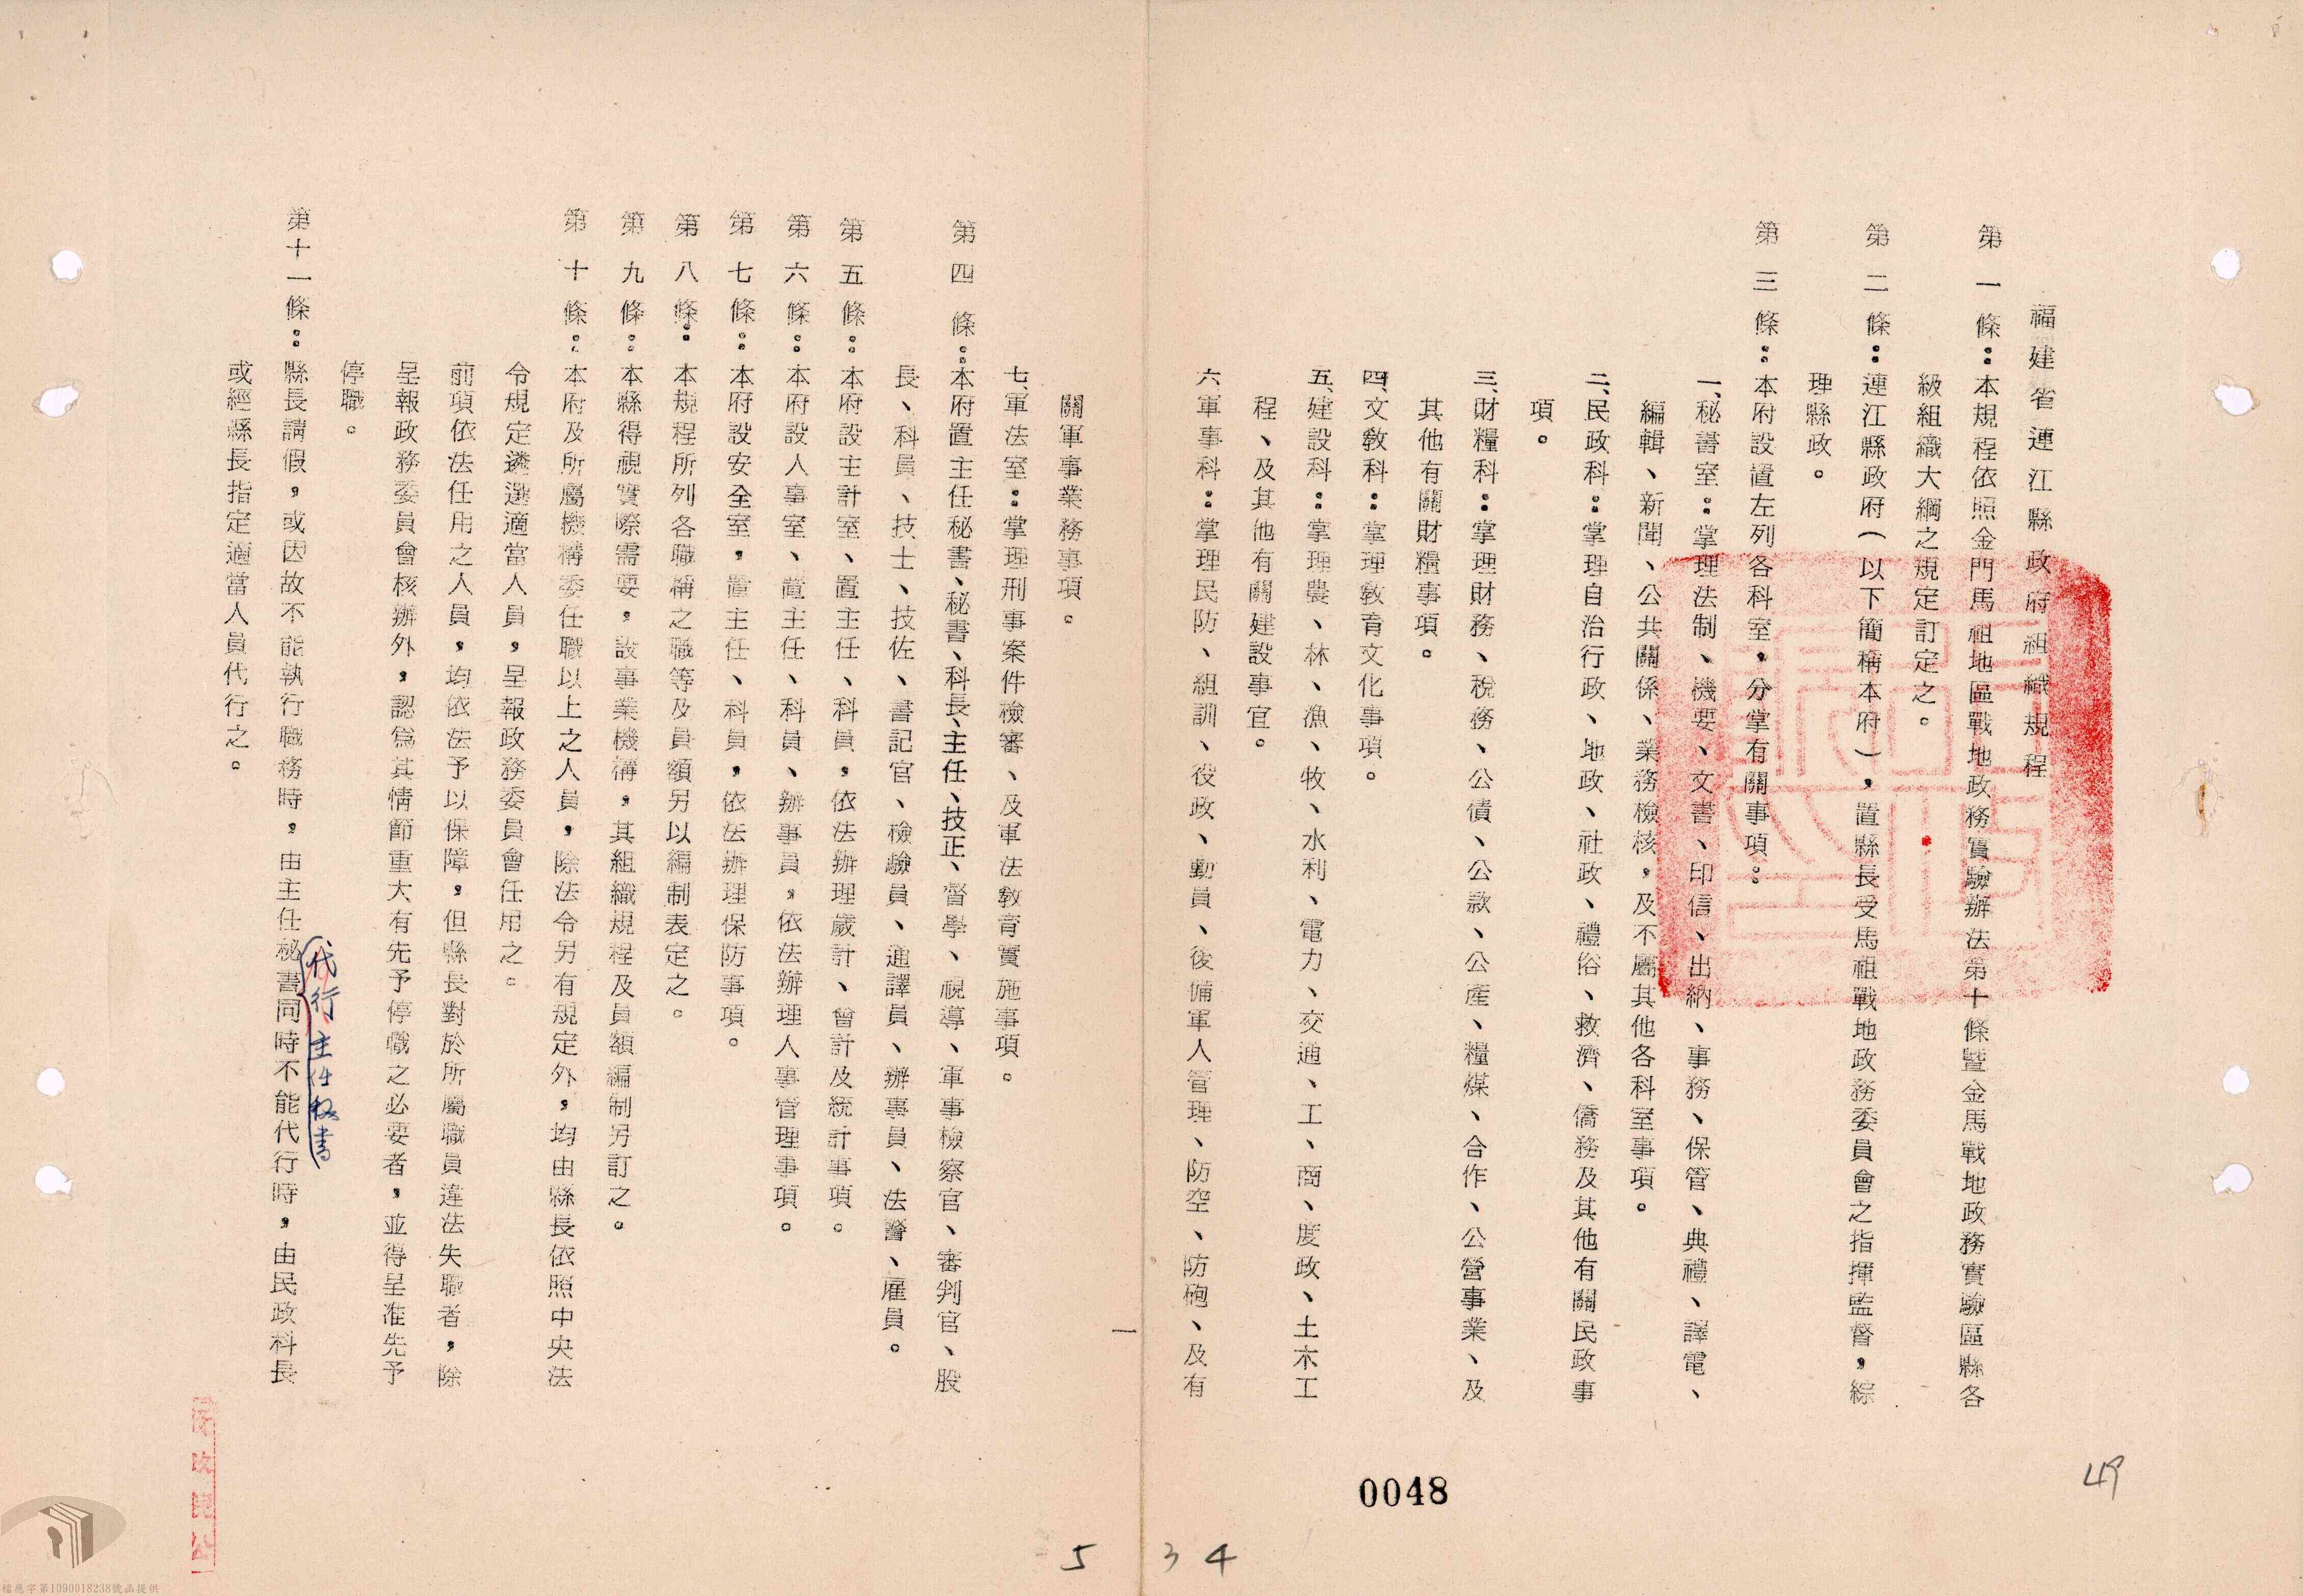 February 1972, the Executive Yuan approves the Organizational Regulations of the Lienchiang County Government during the period of military administration.